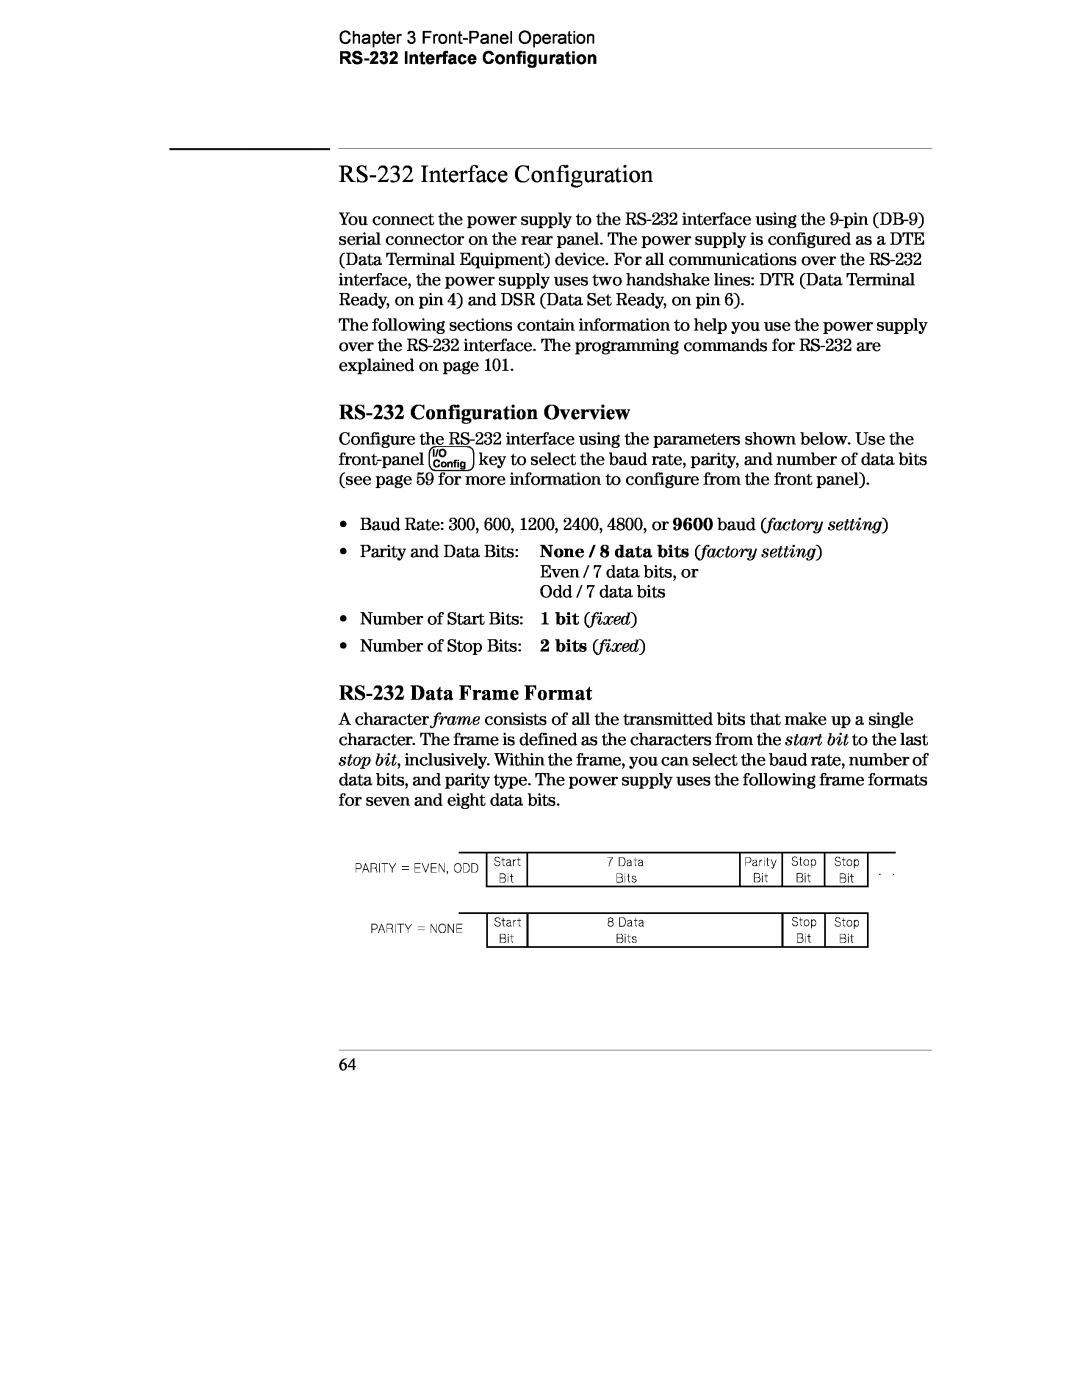 Agilent Technologies E3634A manual RS-232 Interface Configuration, RS-232 Configuration Overview, RS-232 Data Frame Format 